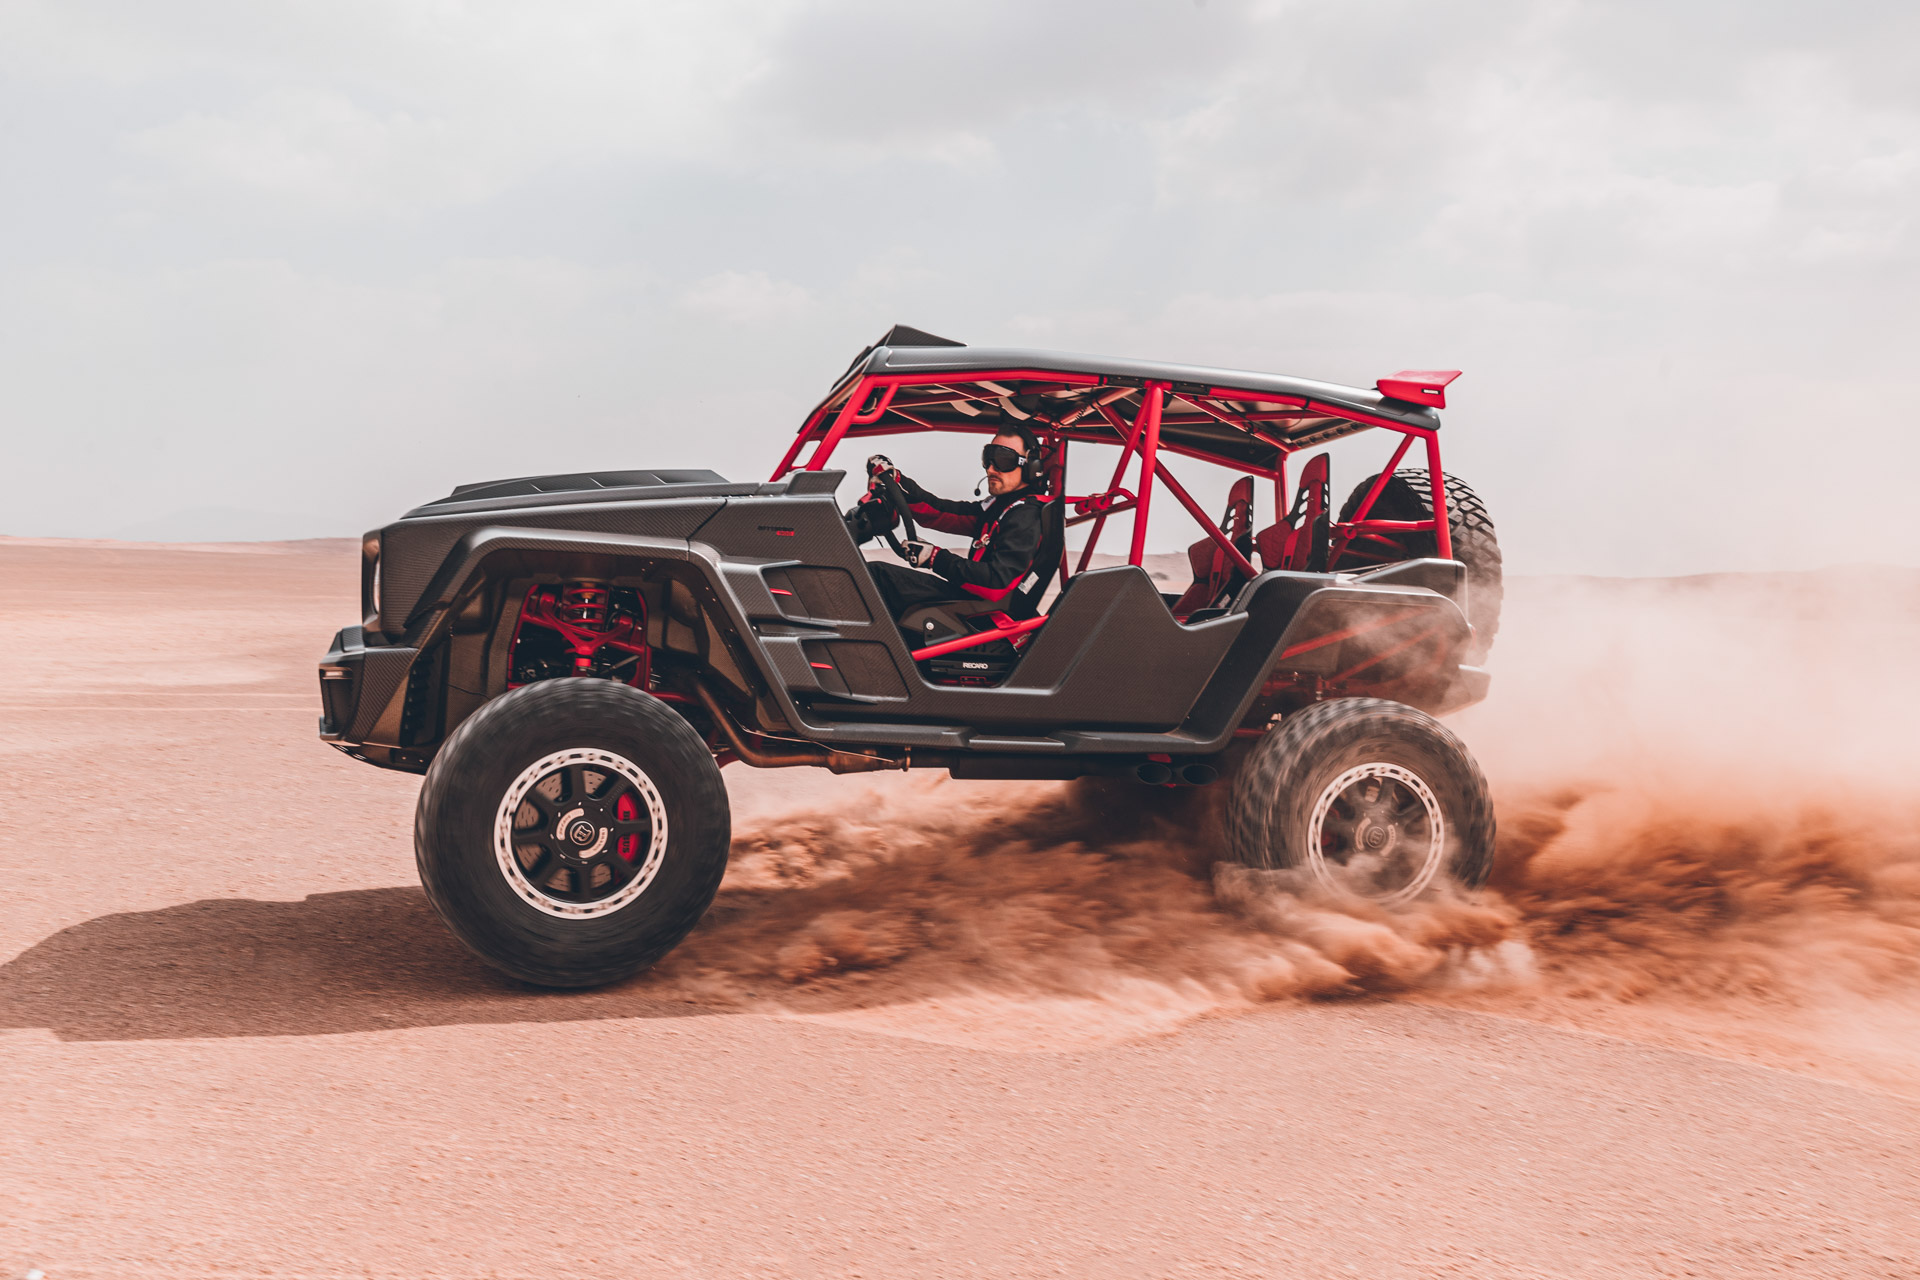 brabus-crawler-tested-in-a-sandy-dune